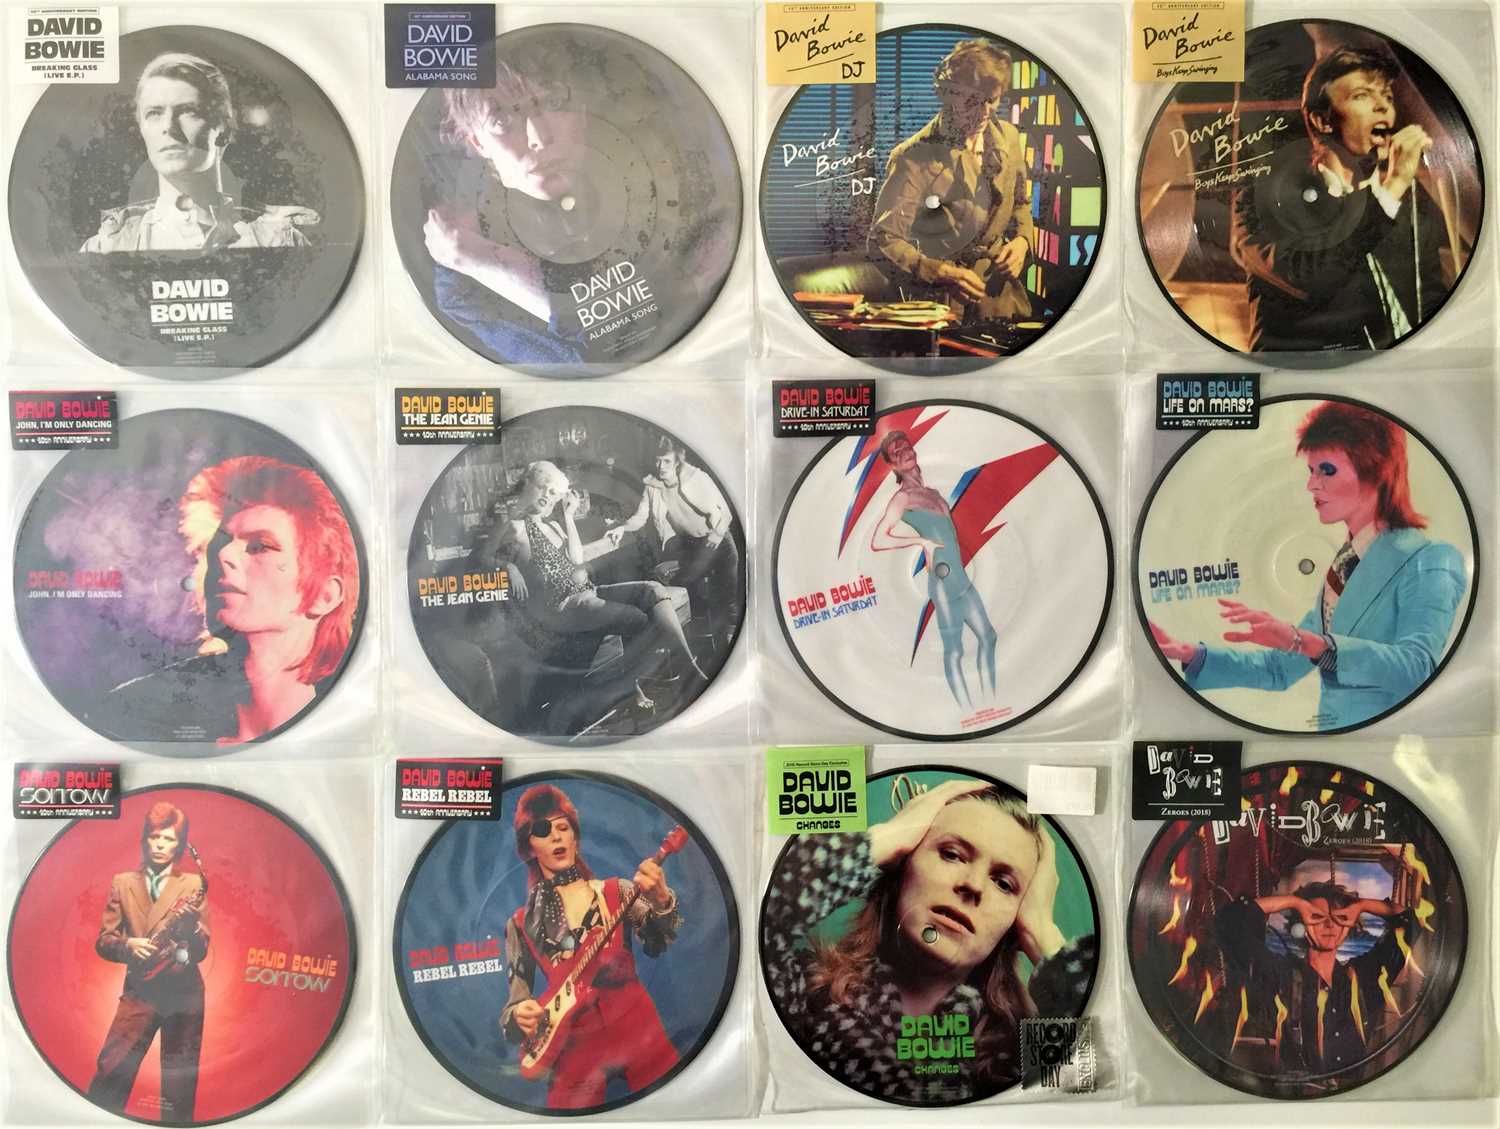 Lot 27 - DAVID BOWIE - 40TH ANNIVERSARY 7" PICTURE DISC COLLECTION